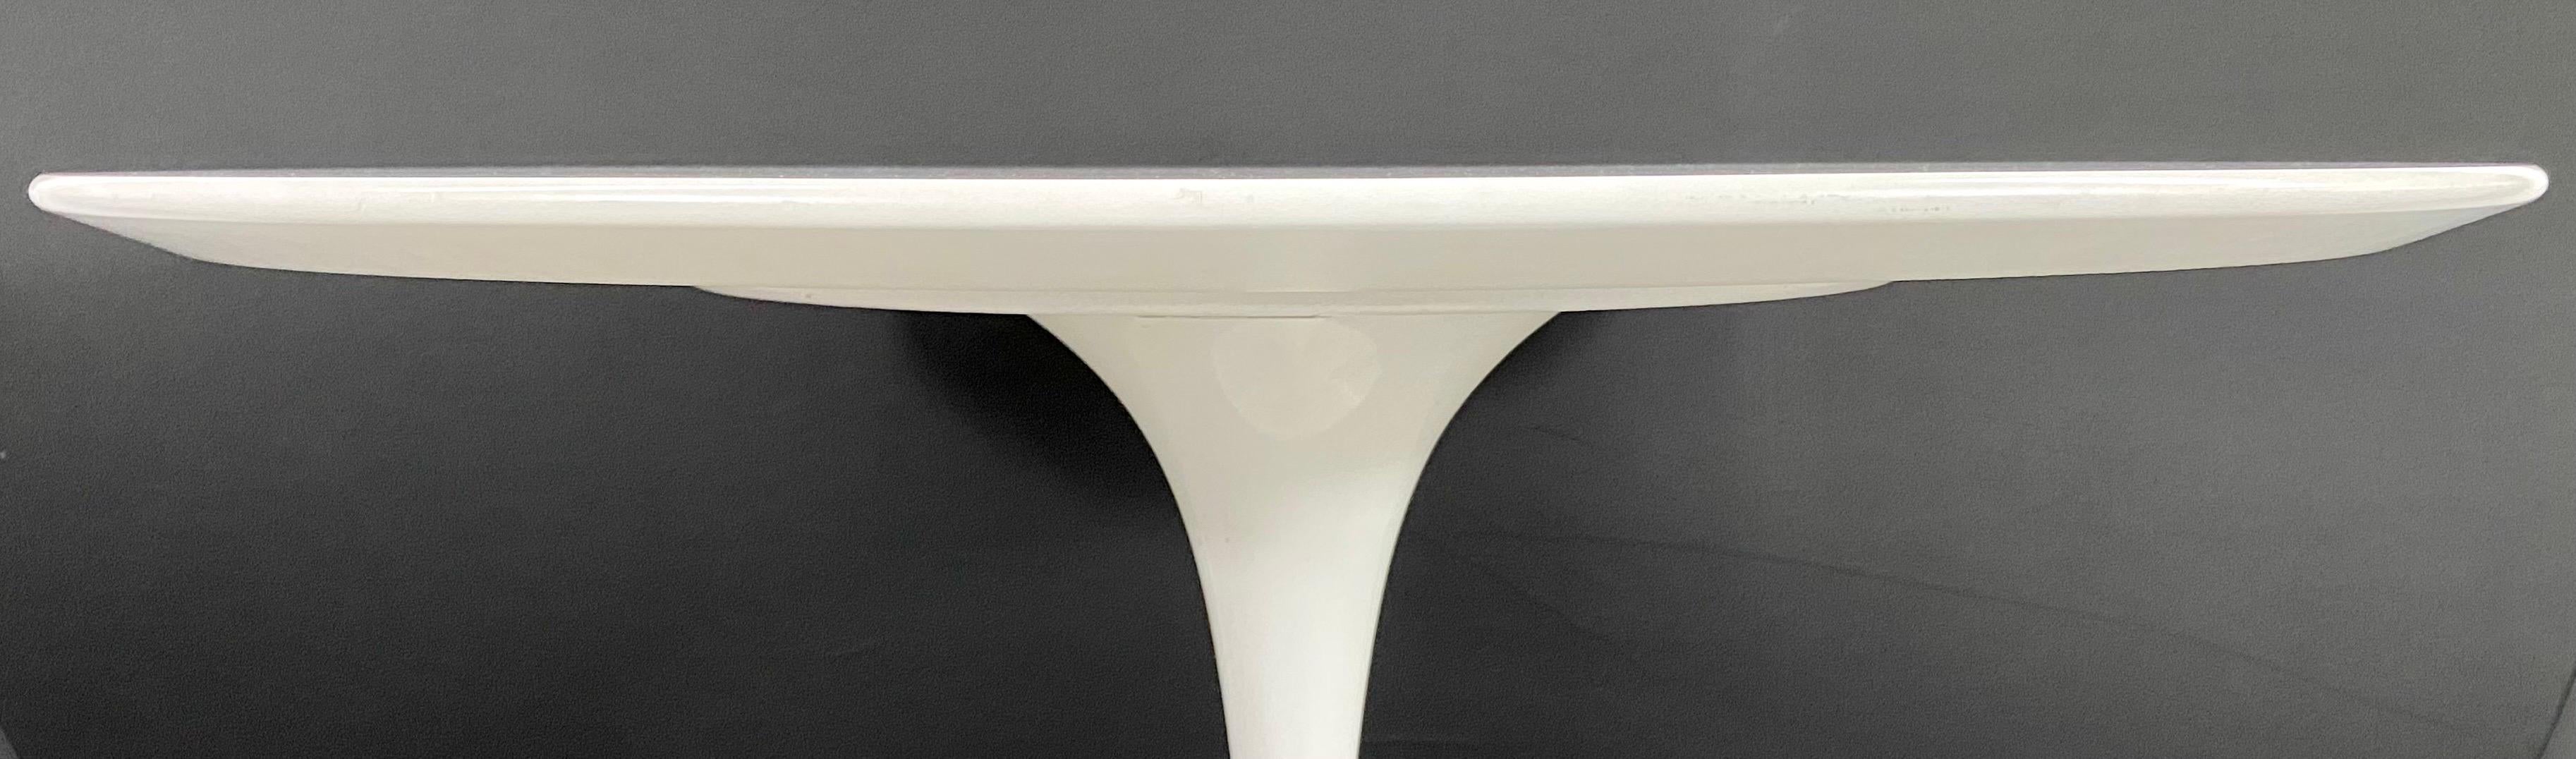 Iron Eero Saarinen for Knoll Studios MCM Tulip White Dining or Center Table, Signed 